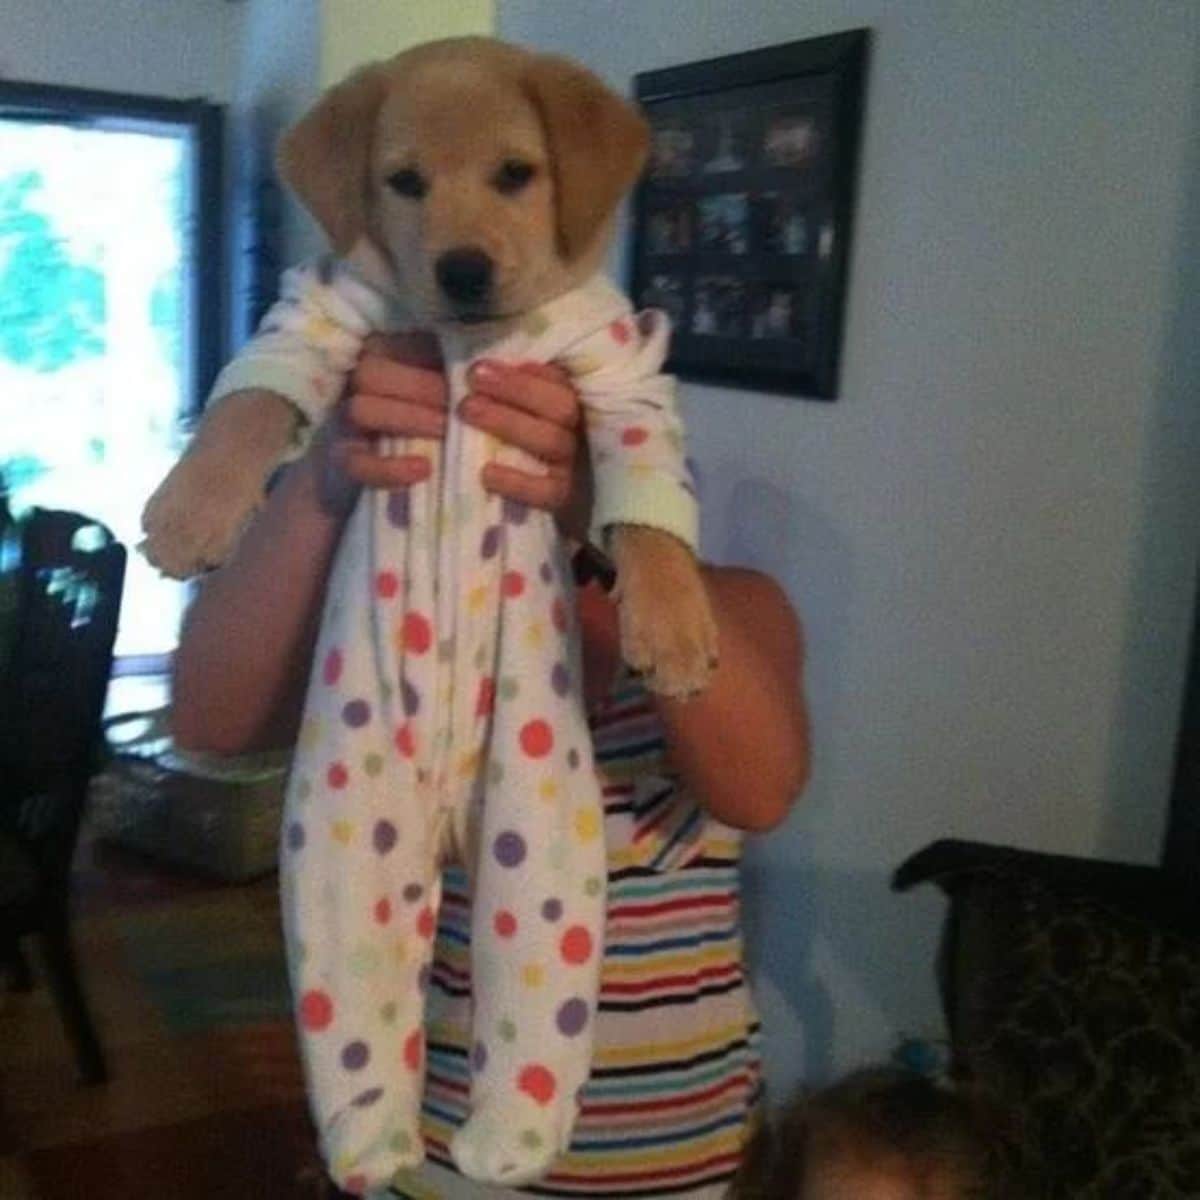 golden retriever puppy wearing a white and colourful polka dotted onesie and being held up by someone